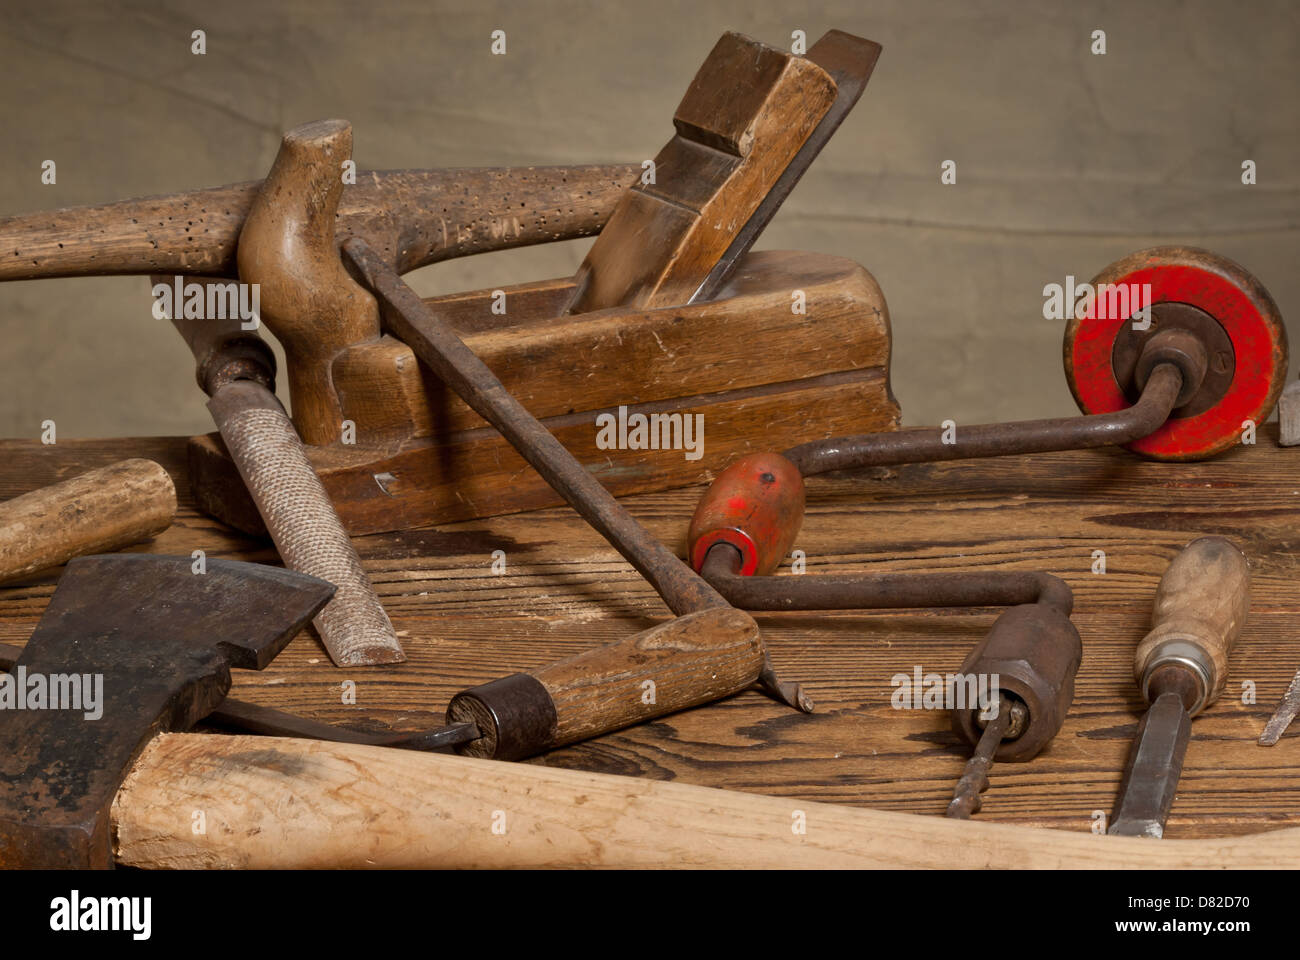 joiner's shop Stock Photo